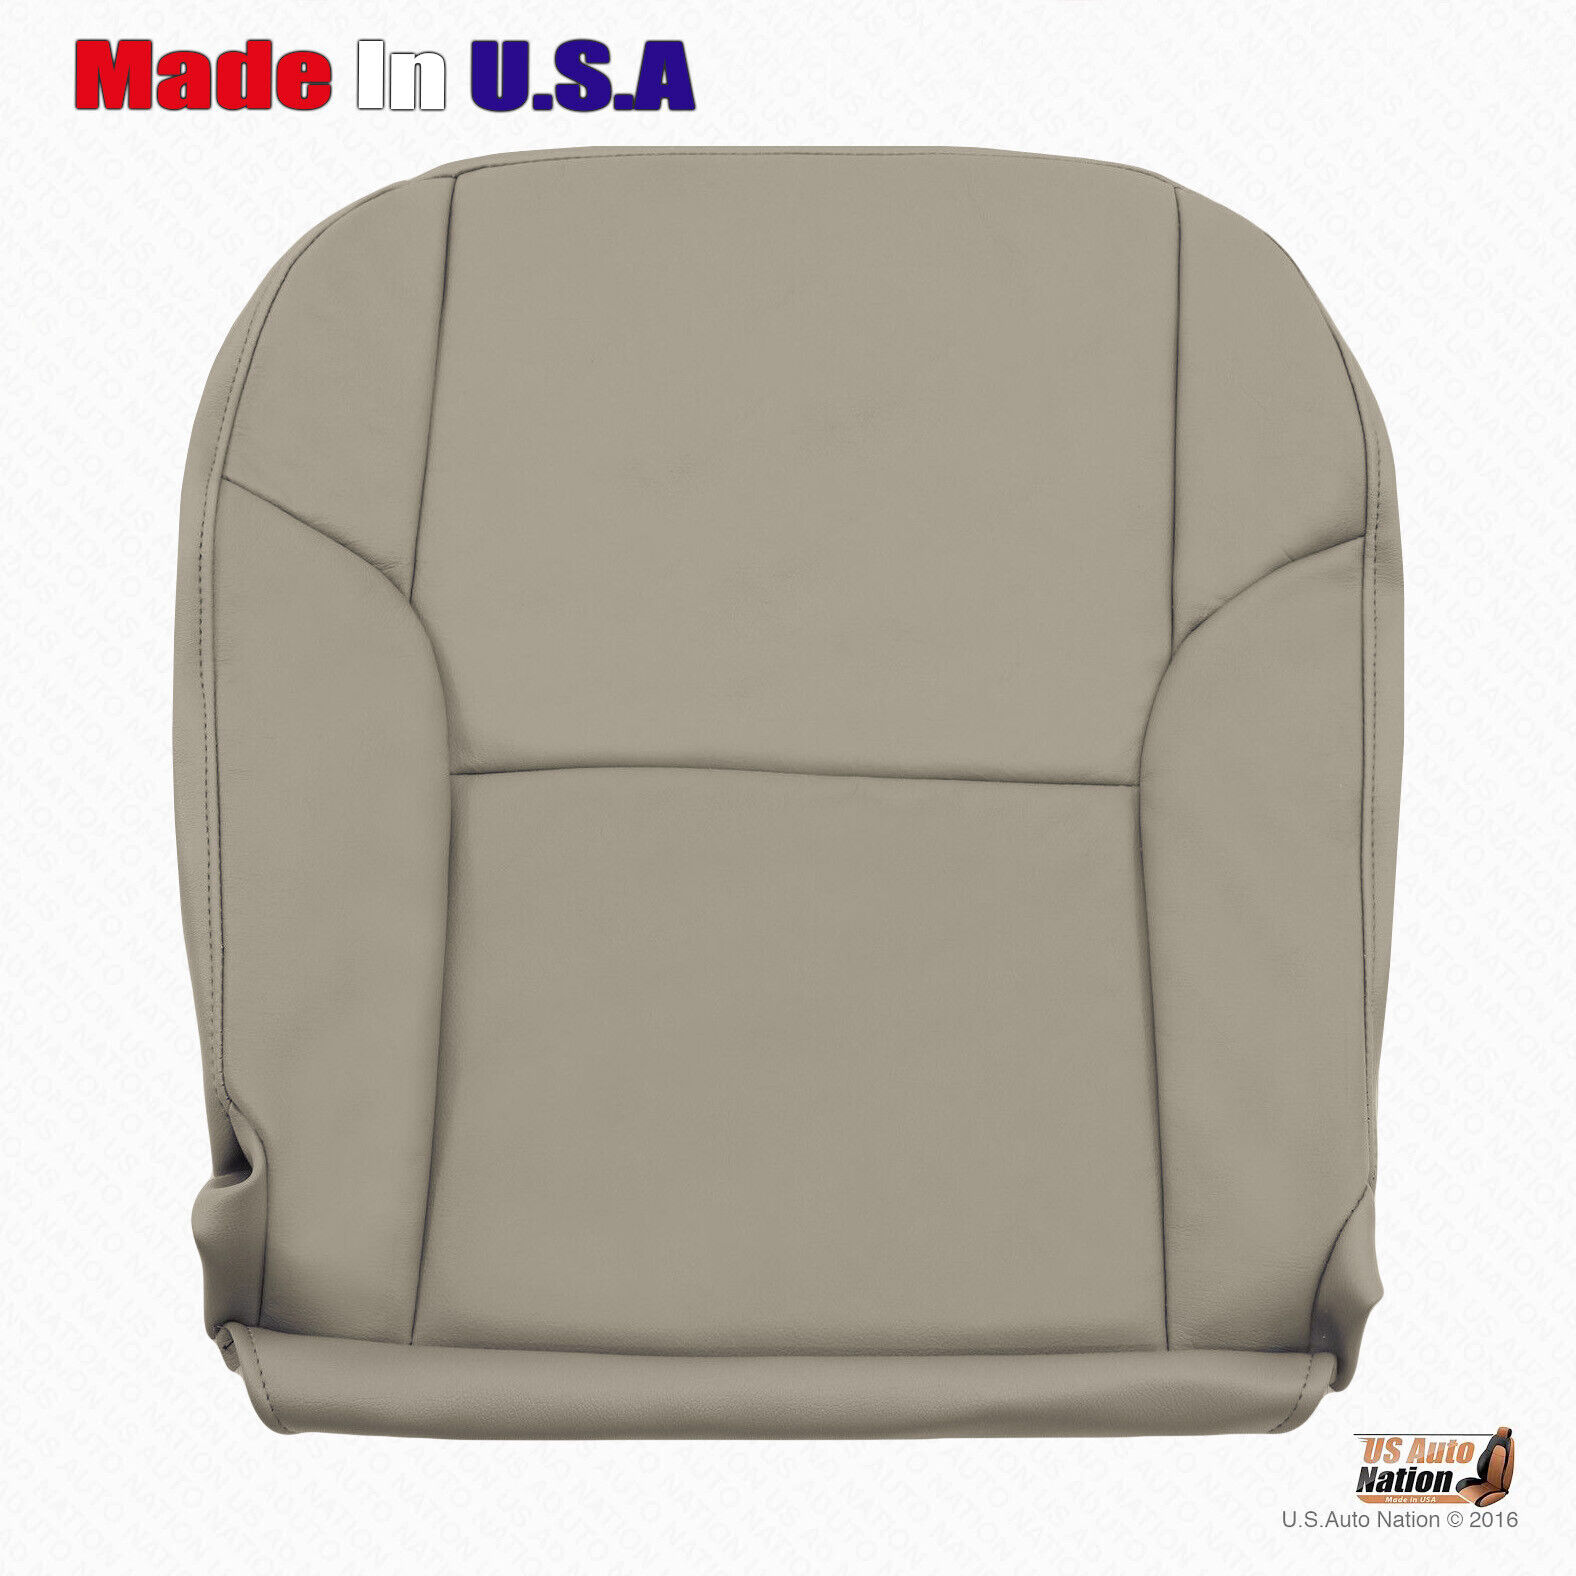 Coverking's custom Rhinohide Chestnut Brown seat covers are designed for the front row of the Toyota 4Runner, with the part number CSCRH4TT7573.